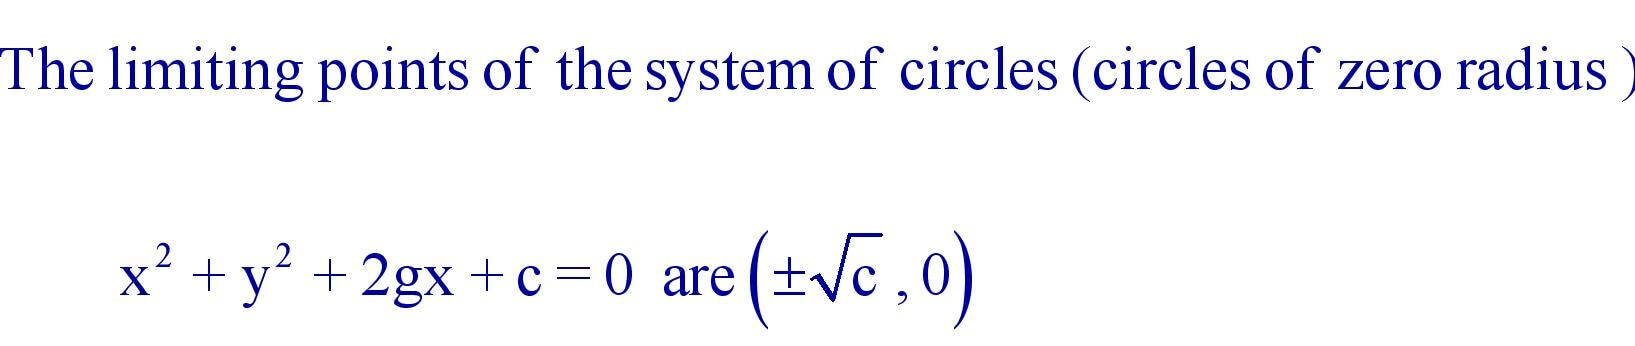 The limiting points of the system of circles